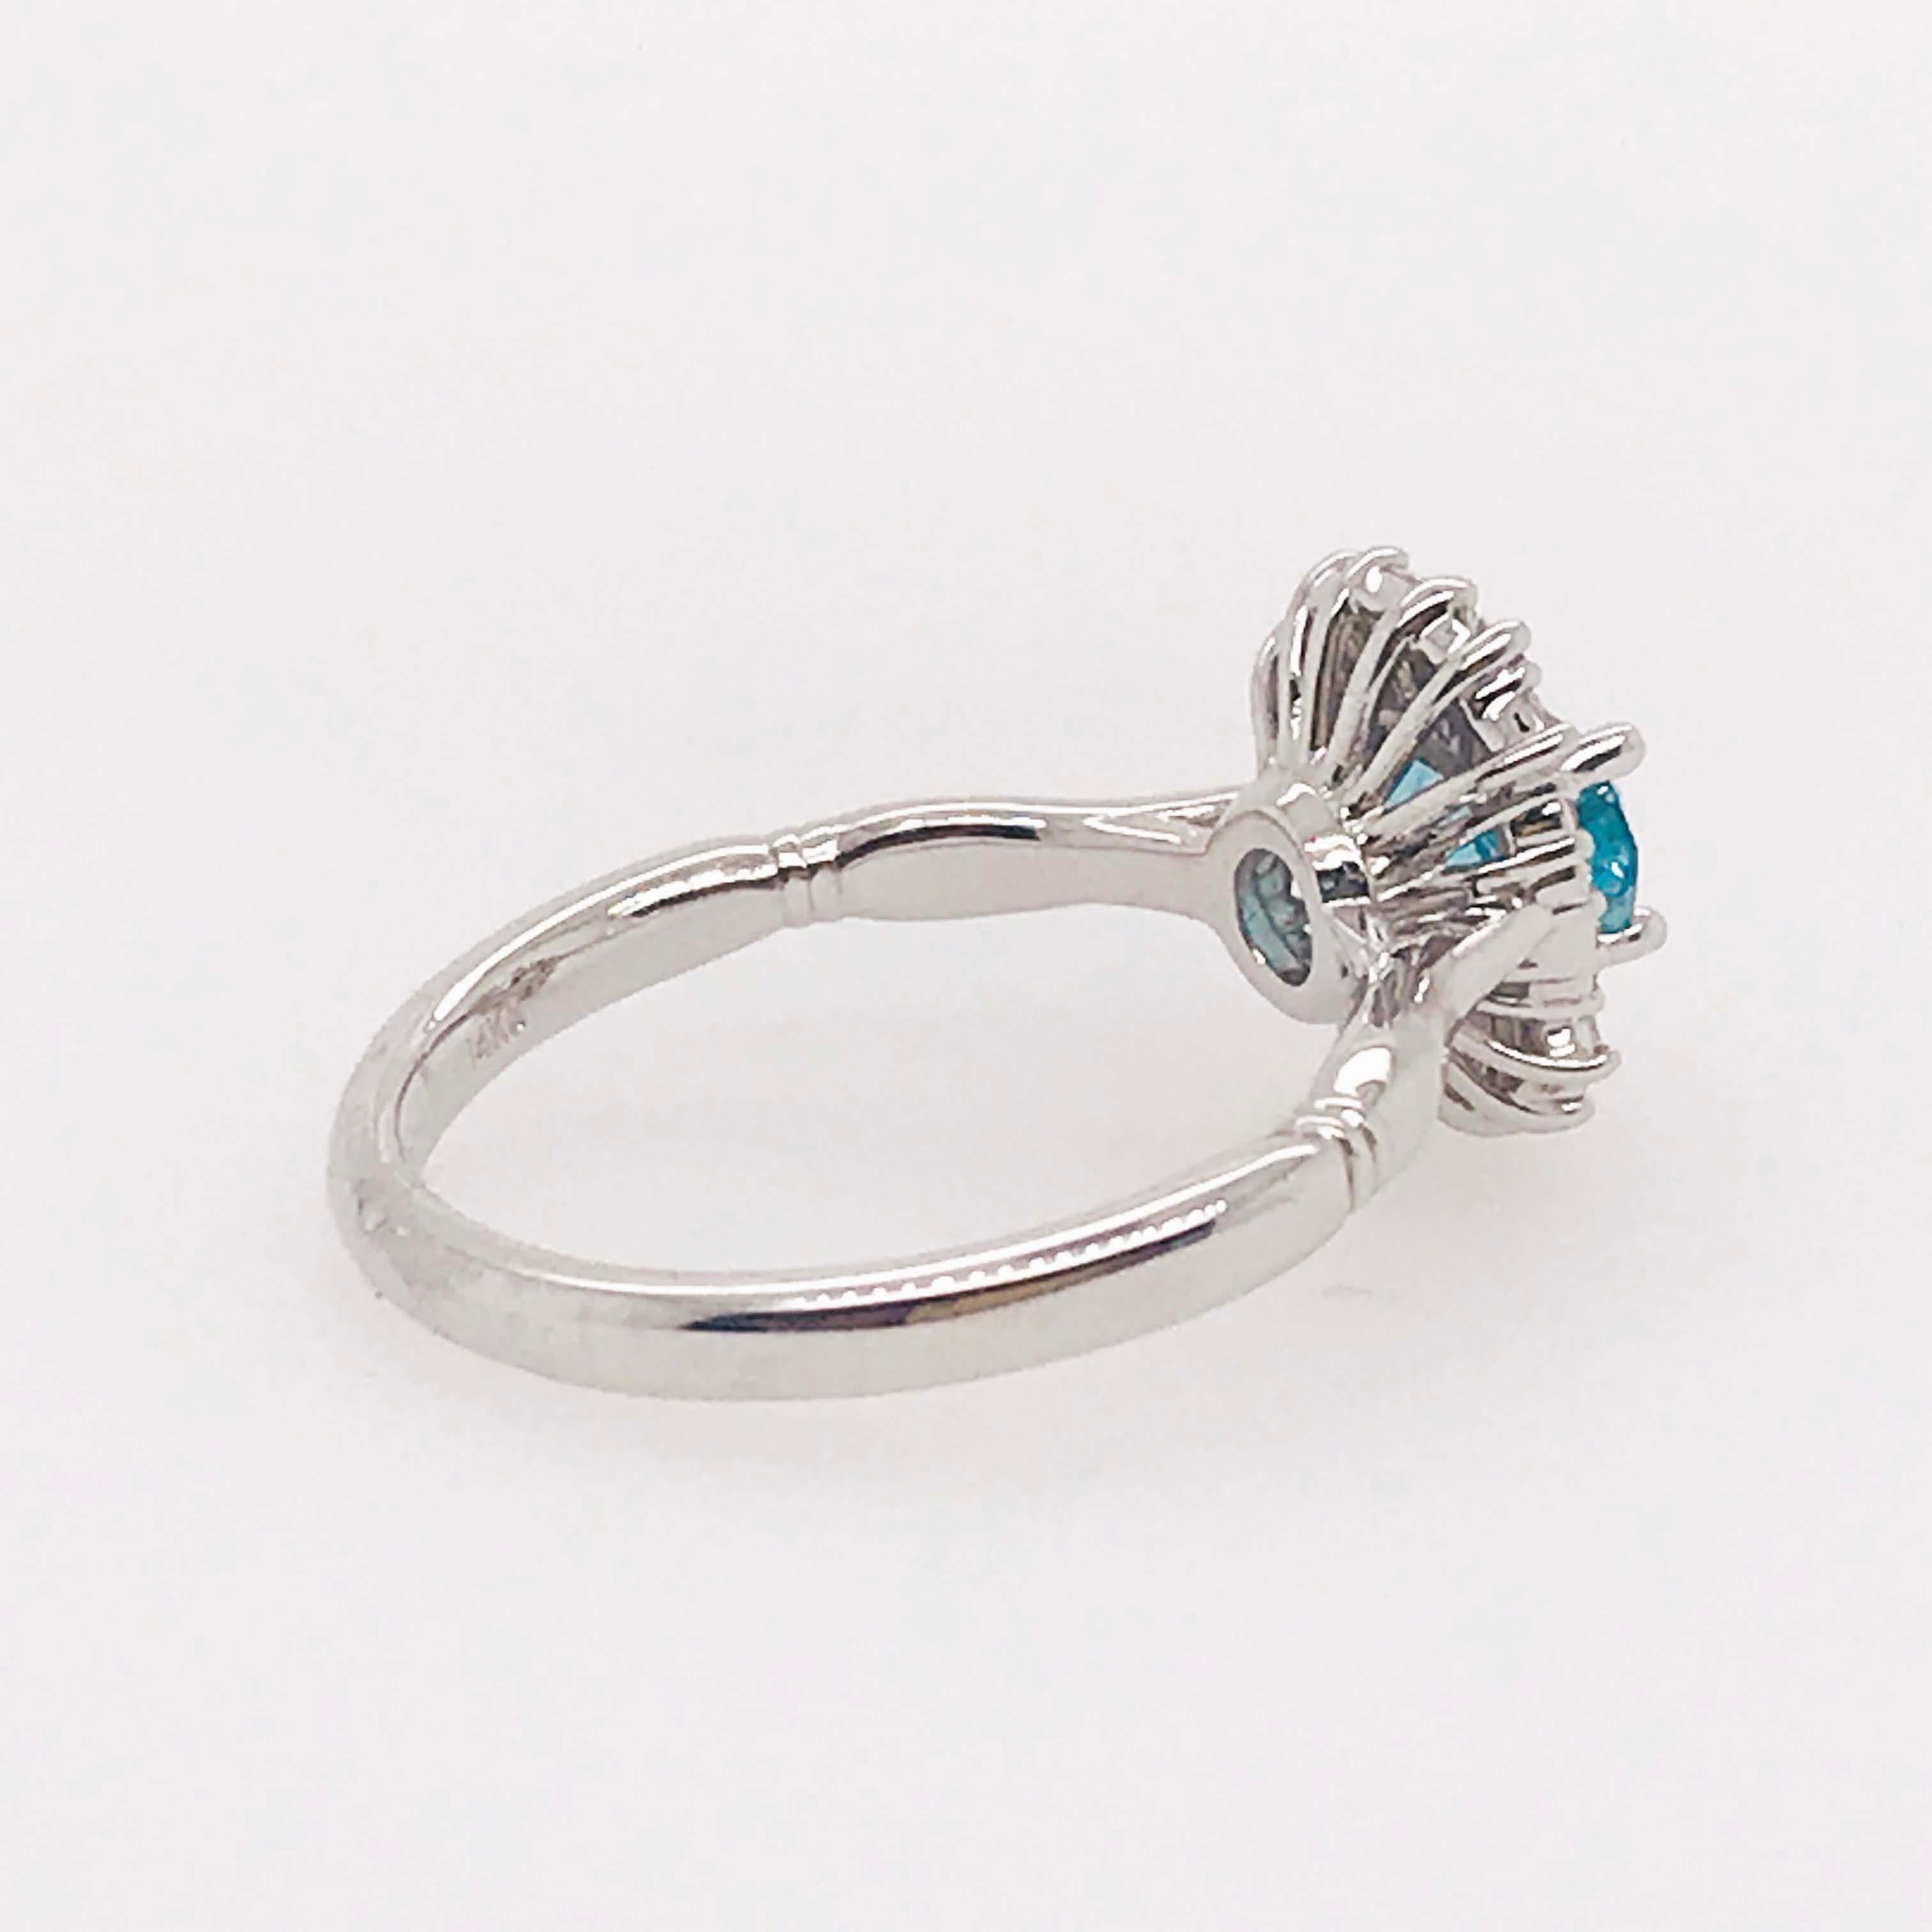 1.45ct Blue Zircon and Diamond Ring Round and Baguette Diamonds 14K White Gold In New Condition For Sale In Austin, TX